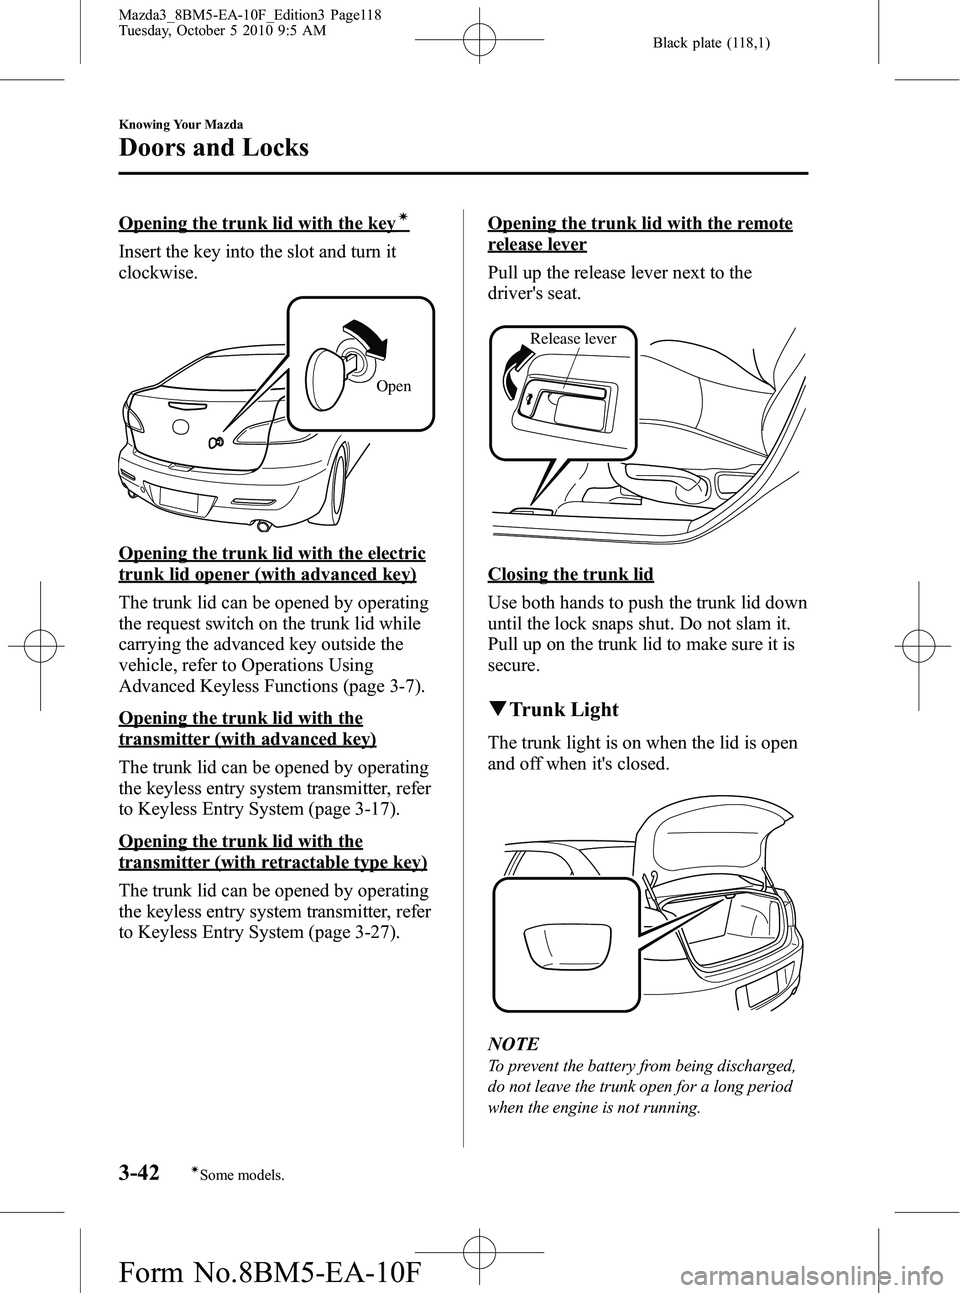 MAZDA MODEL 3 4-DOOR 2011  Owners Manual Black plate (118,1)
Opening the trunk lid with the keyí
Insert the key into the slot and turn it
clockwise.
Open
Opening the trunk lid with the electric
trunk lid opener (with advanced key)
The trunk